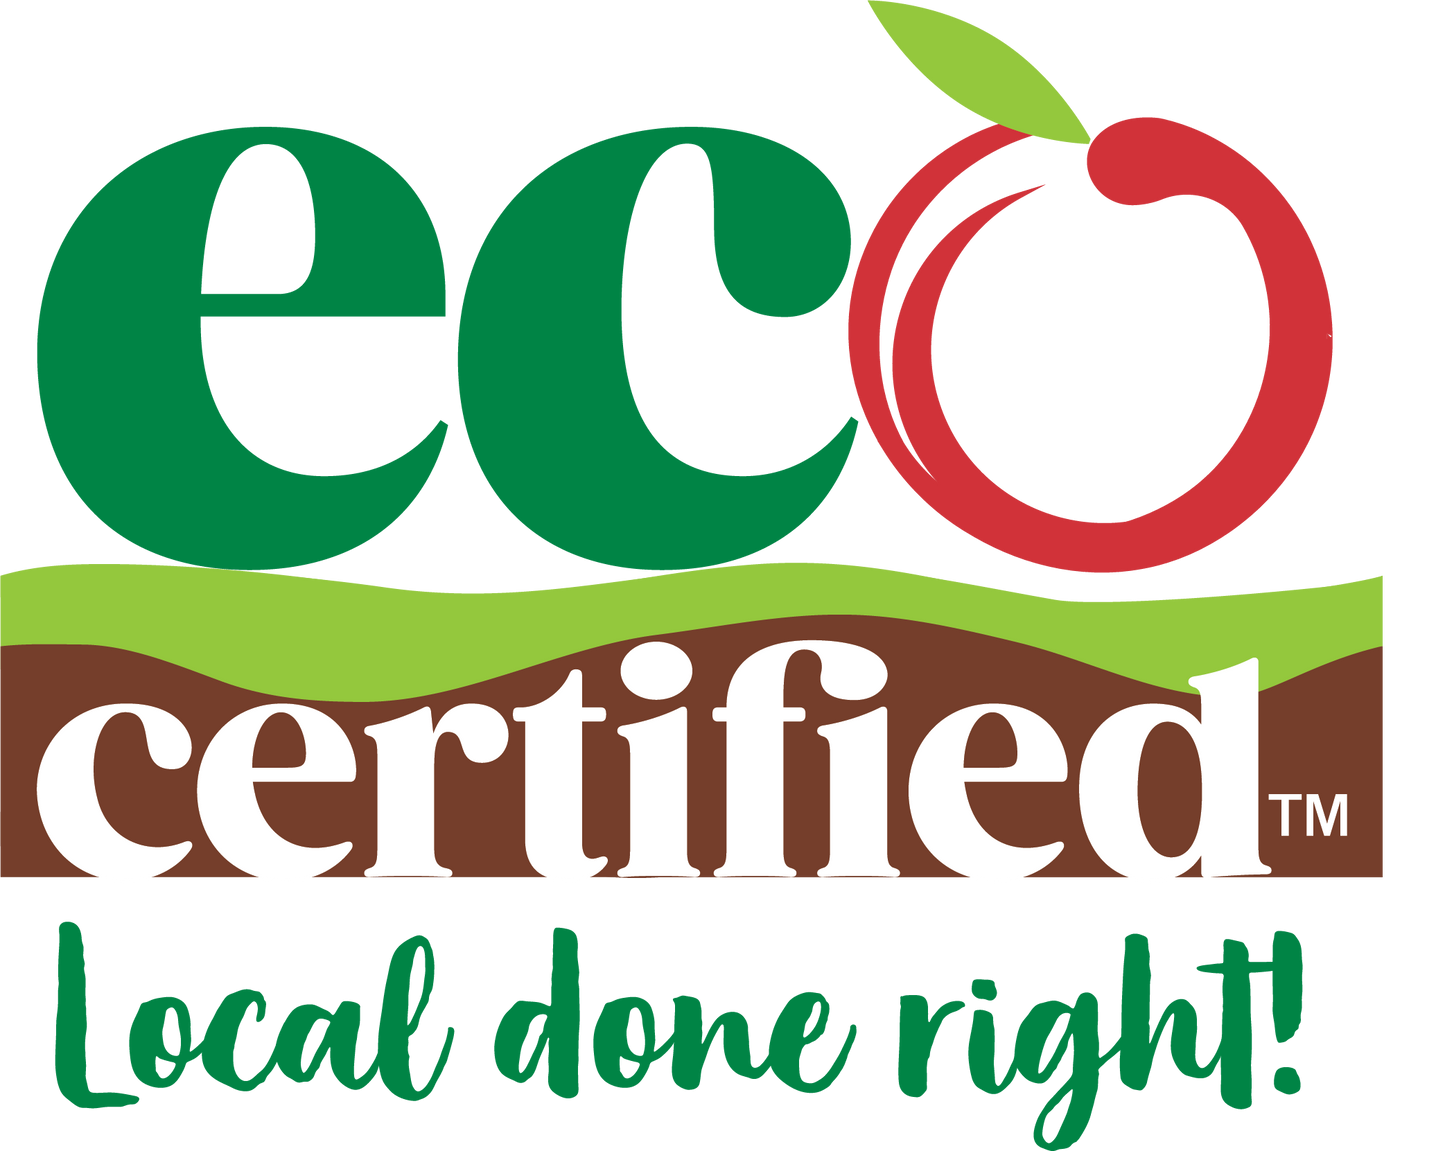 Freeze-Dried Fruit Basket Northeast Grown EcoCertified™ Monthly Subscription Basket